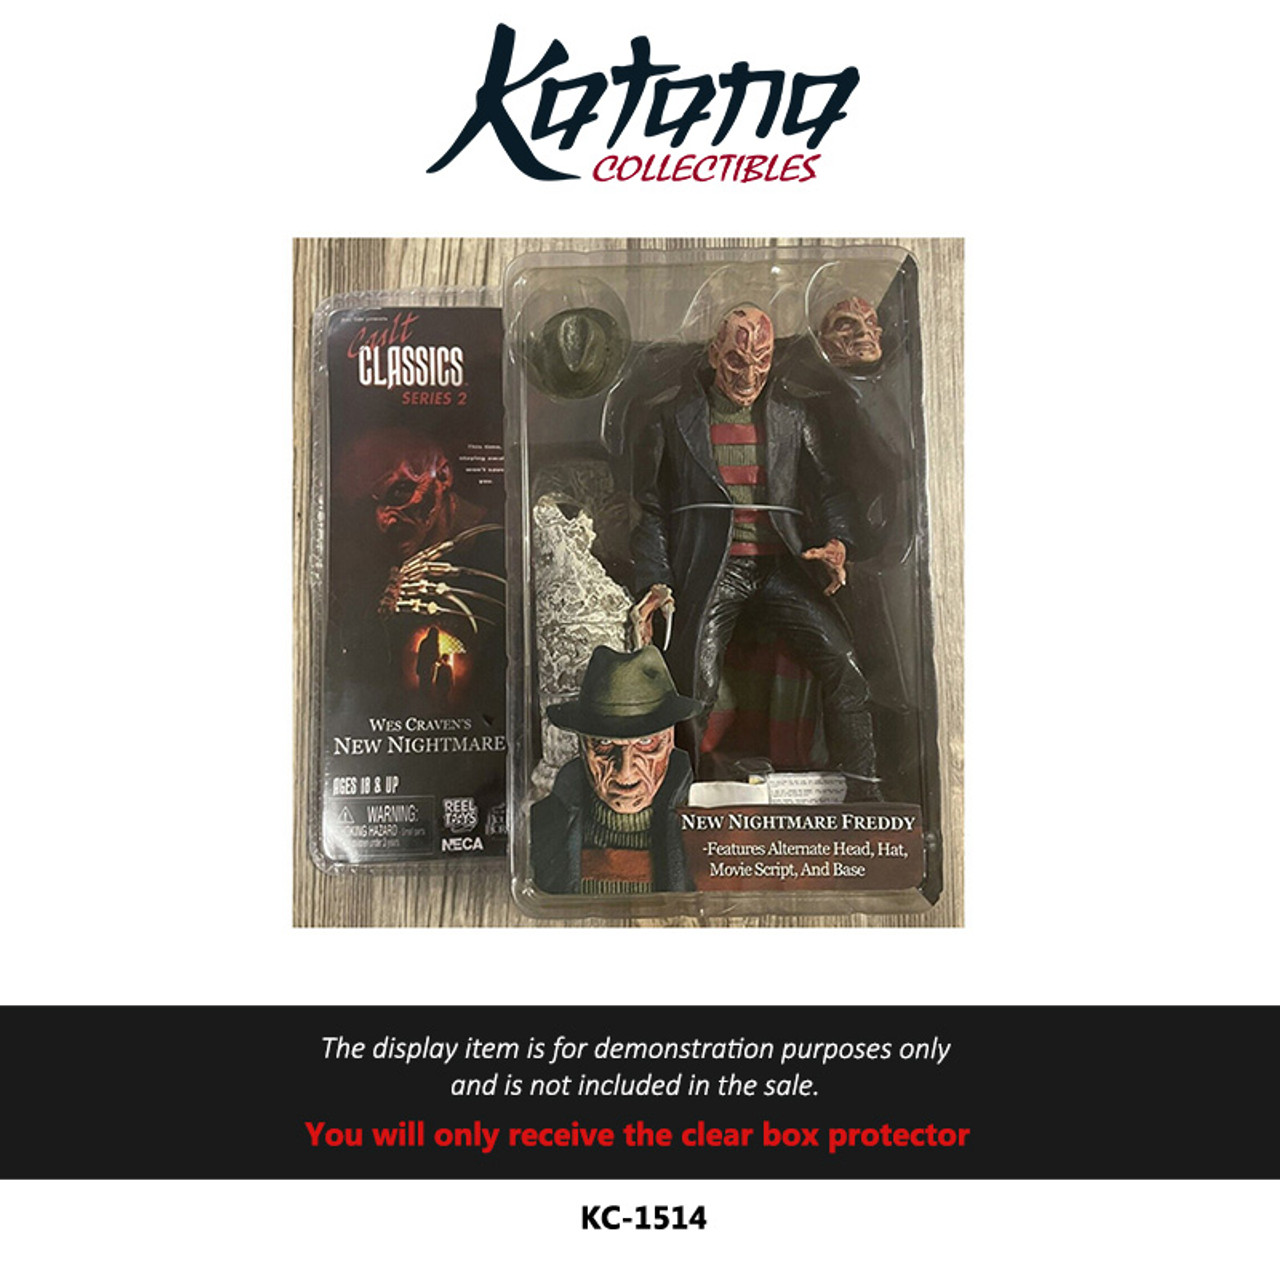 Katana Collectibles Protector For NECA Cult Classics Series 2 New Nightmare Freddy Action Figure